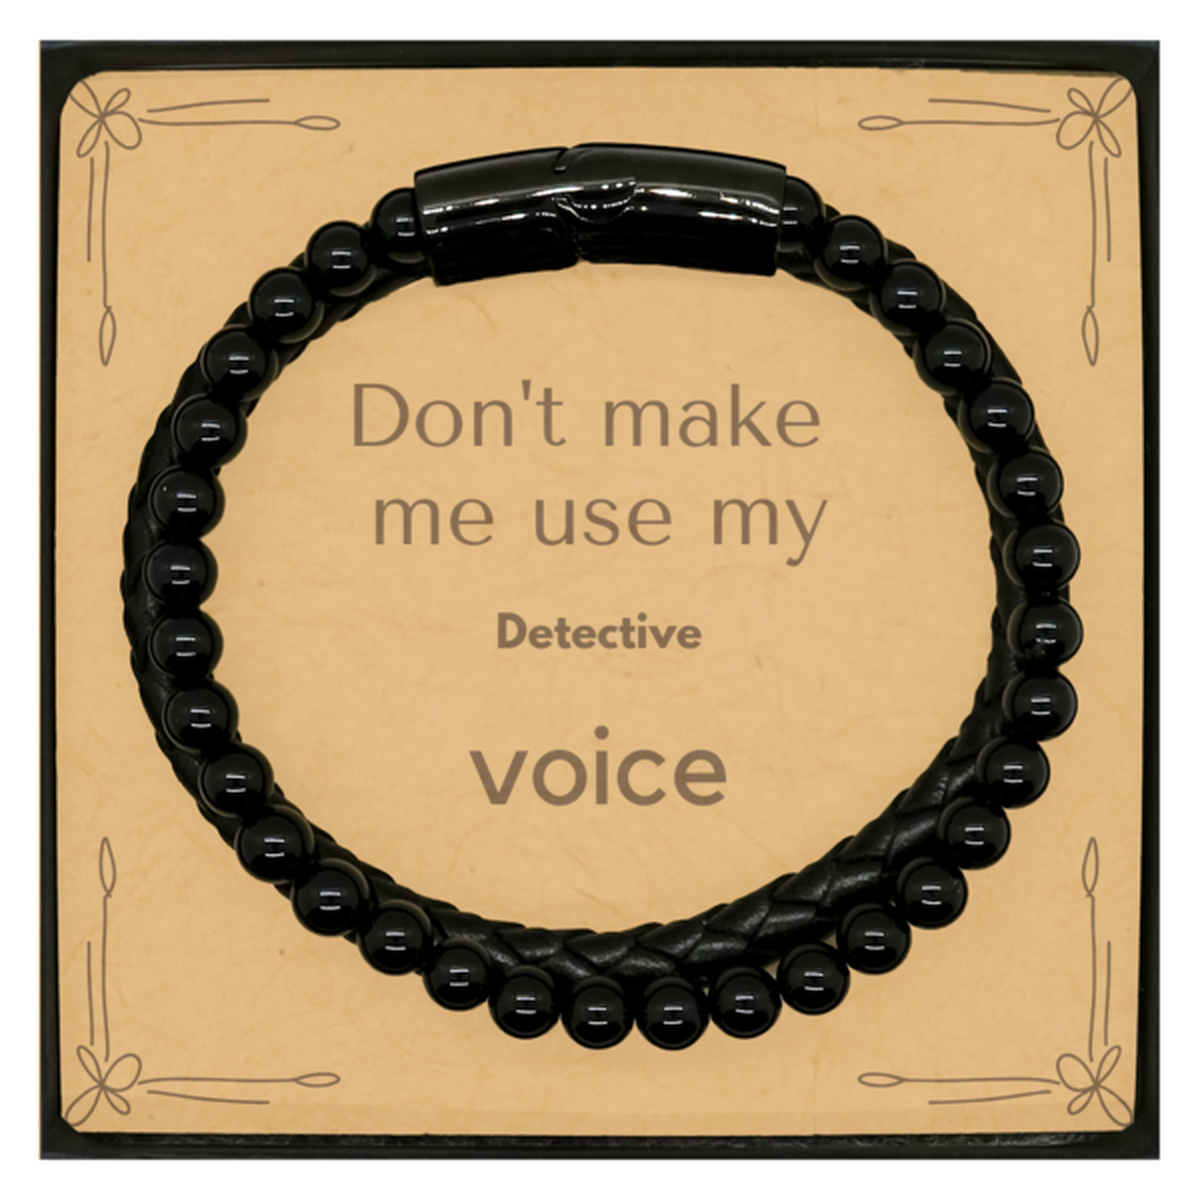 Don't make me use my Detective voice, Sarcasm Detective Card Gifts, Christmas Detective Stone Leather Bracelets Birthday Unique Gifts For Detective Coworkers, Men, Women, Colleague, Friends